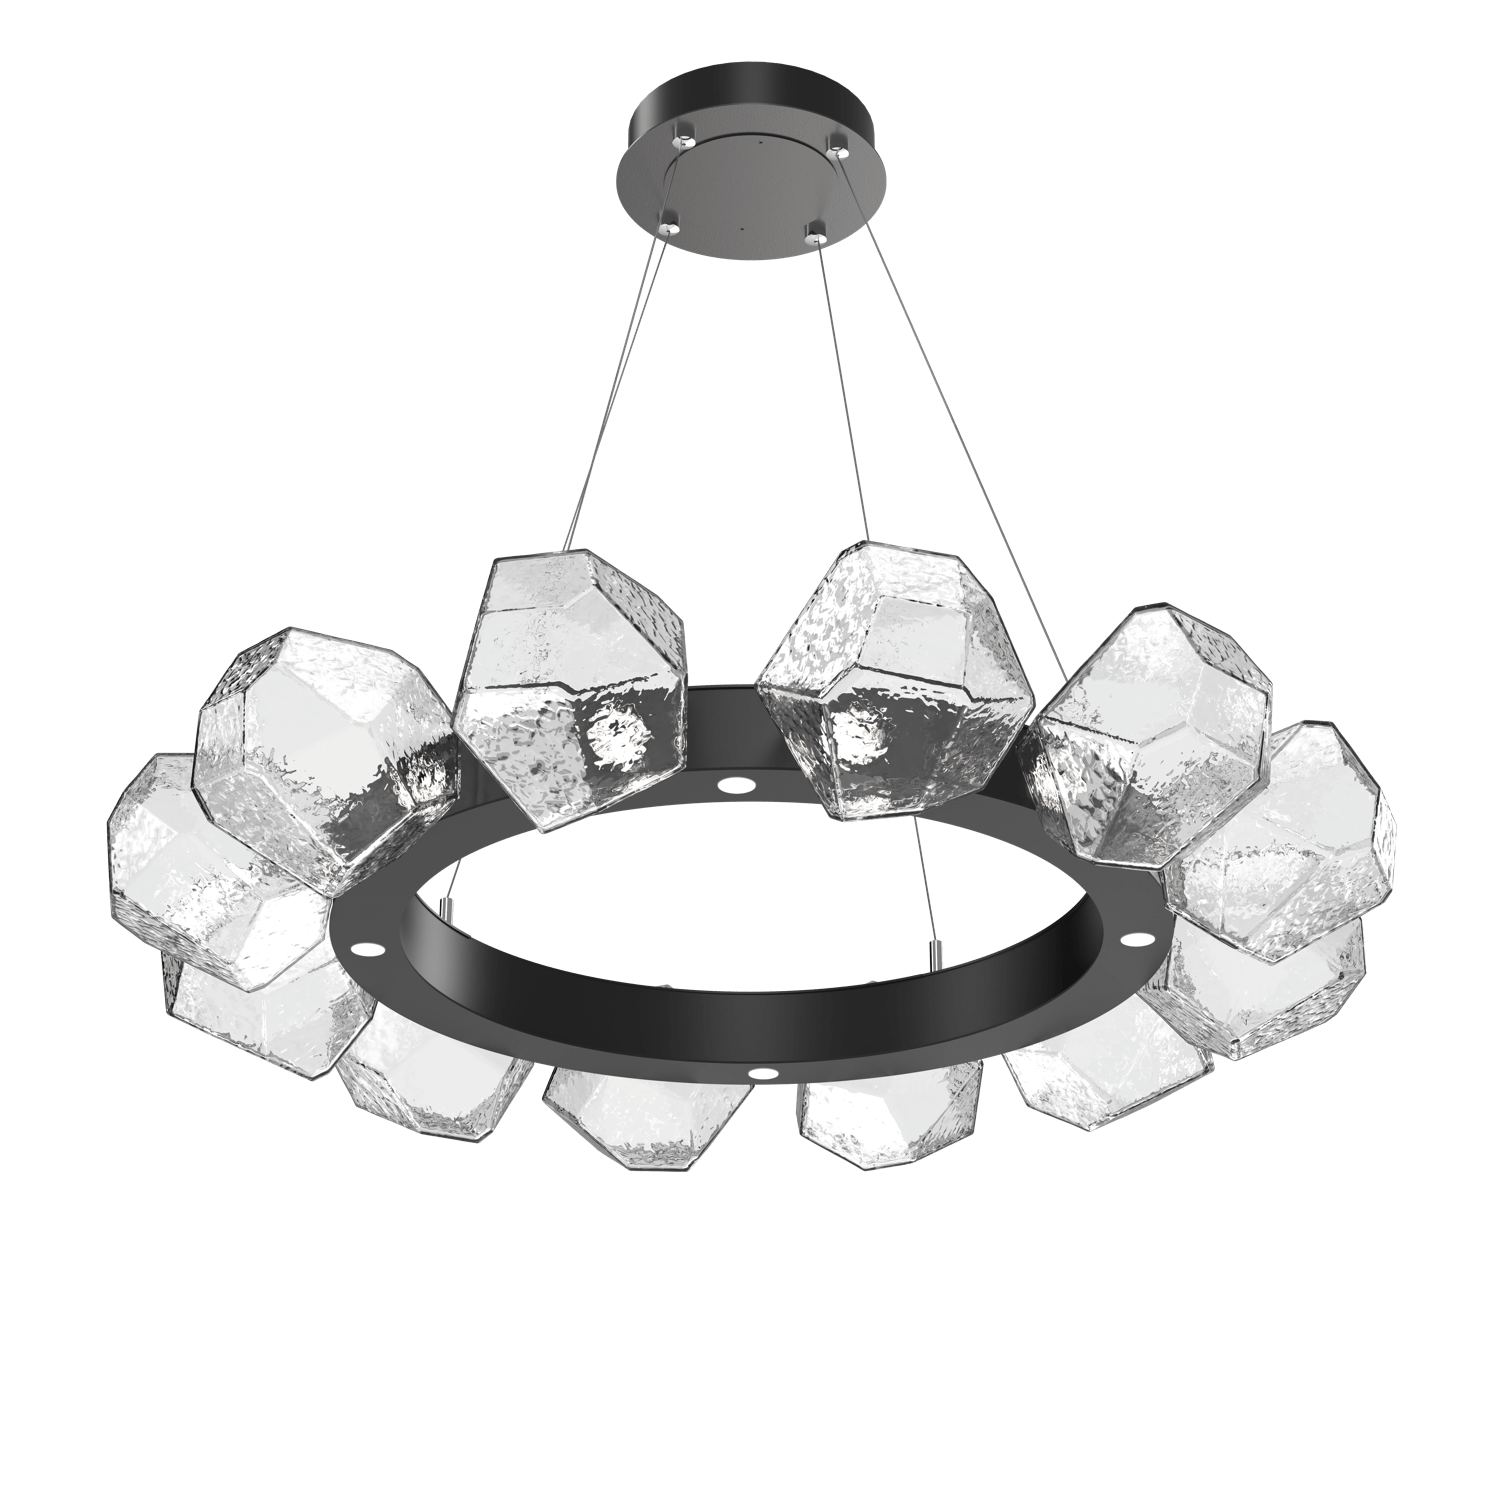 CHB0039-36-MB-C-Hammerton-Studio-Gem-36-inch-radial-ring-chandelier-with-matte-black-finish-and-clear-blown-glass-shades-and-LED-lamping